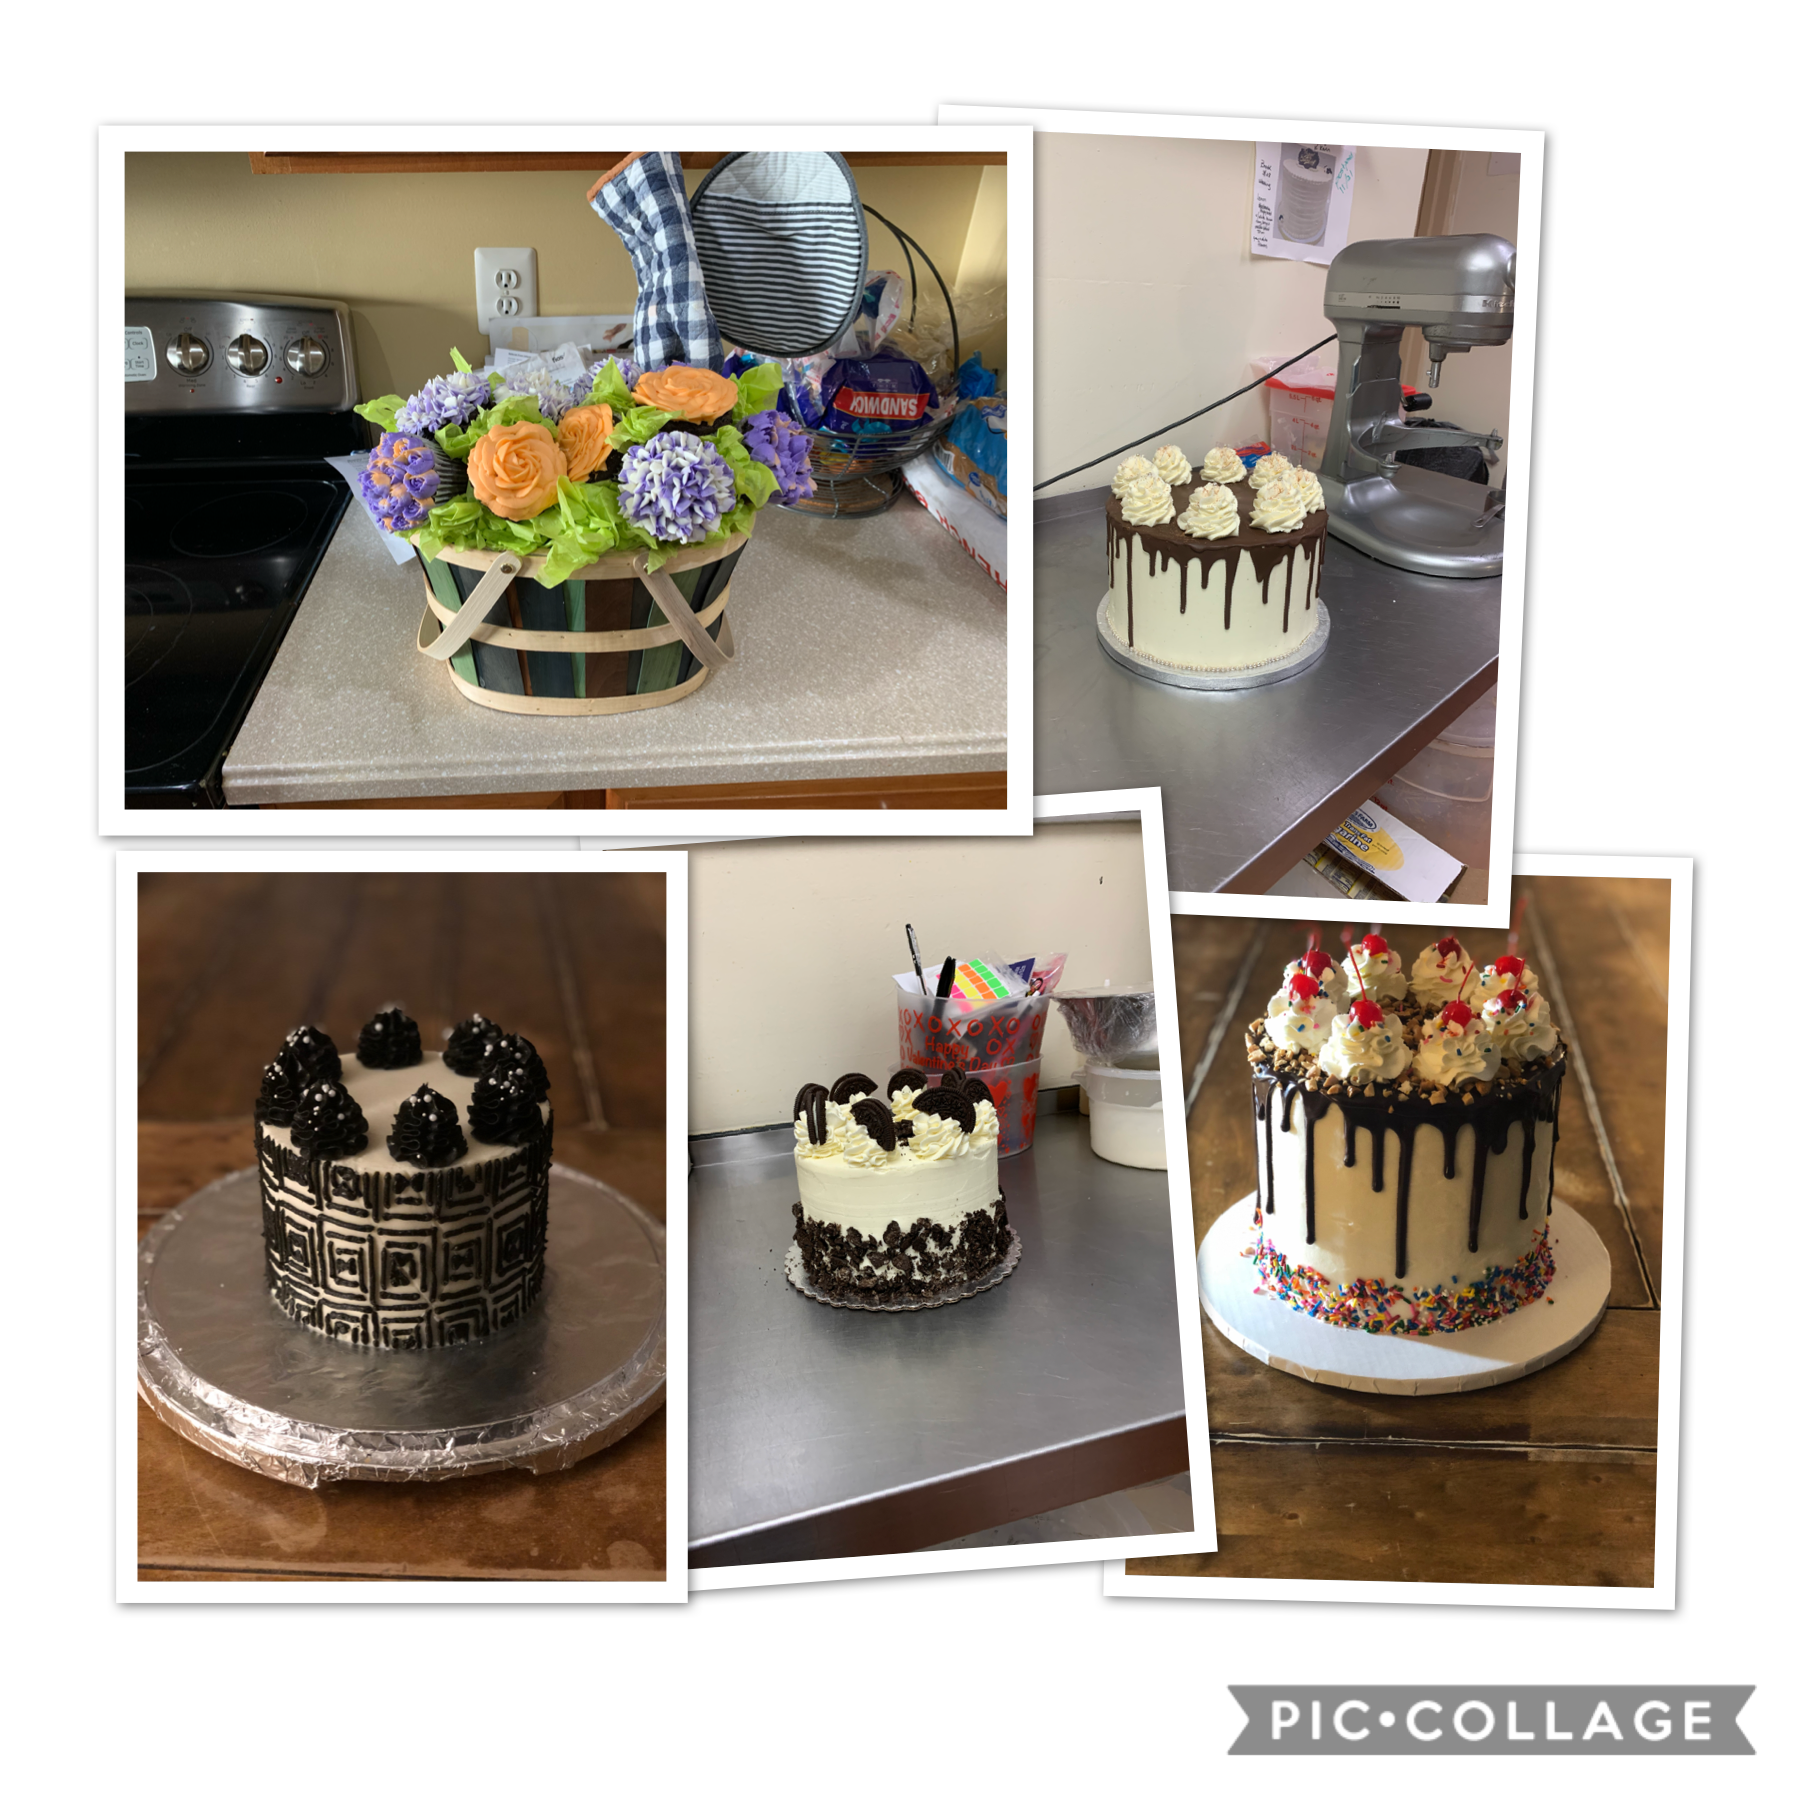 Some other cakes I’ve made recently